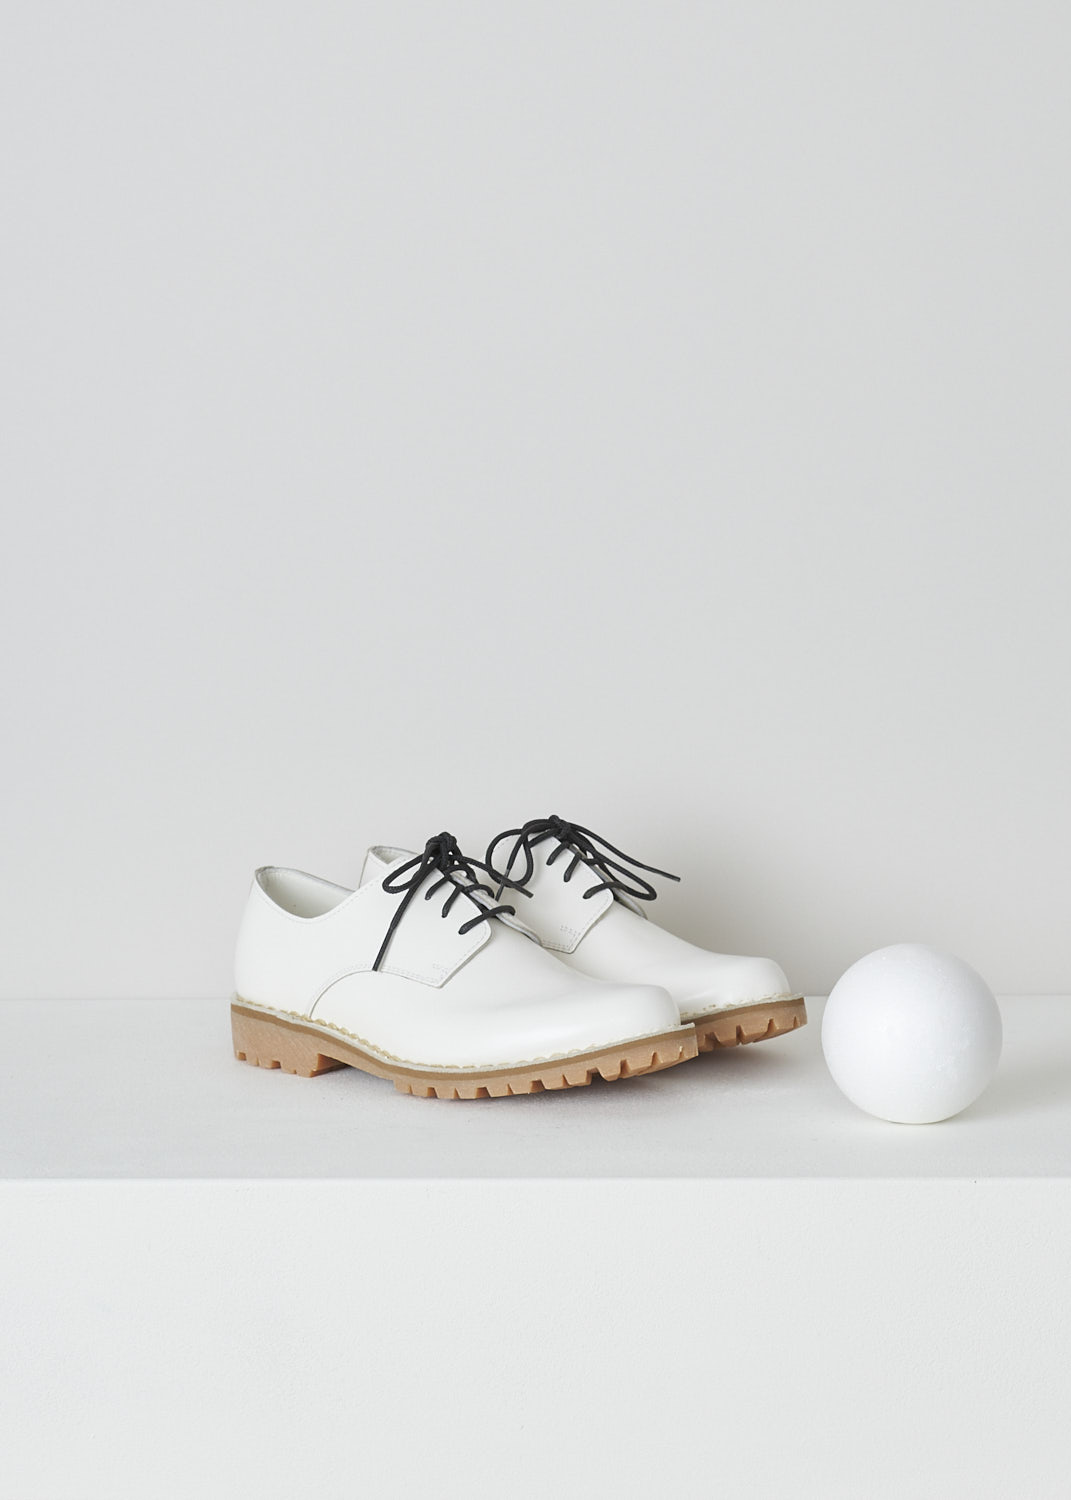 SOFIE Dâ€™HOORE, WHITE DERBY SHOES WITH BLACK LACES, FILOS_LJAZ_WHITE, White, Front, These white leather derby shoes have a round nose and a classic lace-up closing with contrasting black laces. The shoes have sturdy Vibram soles. 

